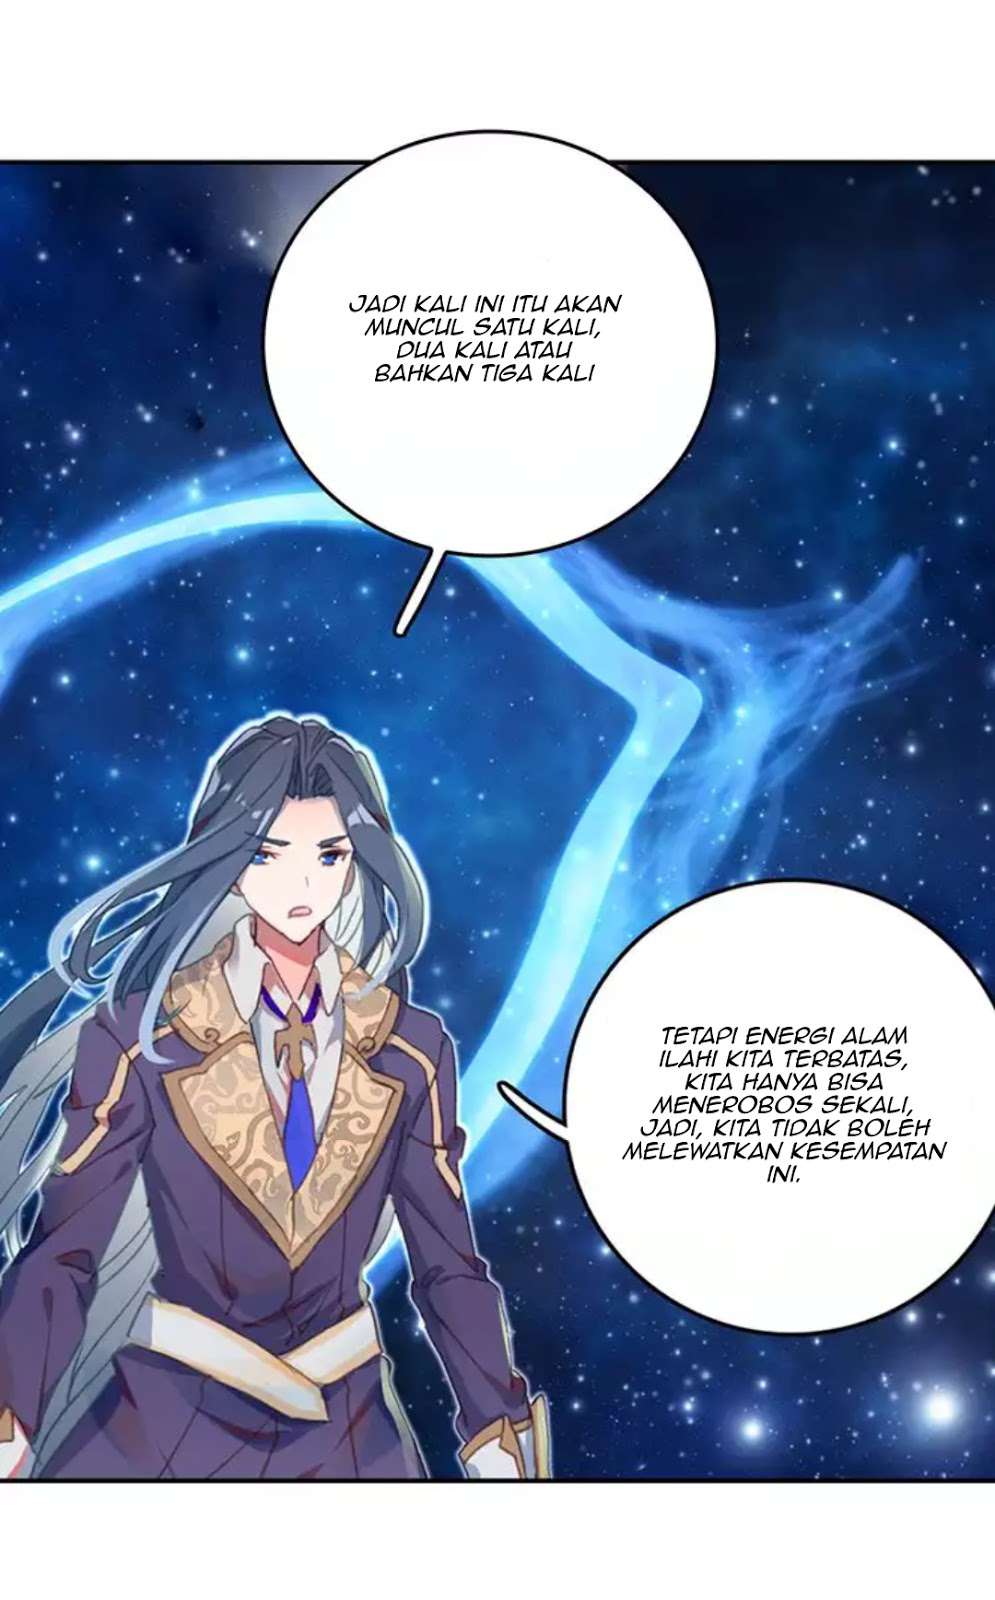 Soul Land Legend of the Tang’s Hero Chapter 2